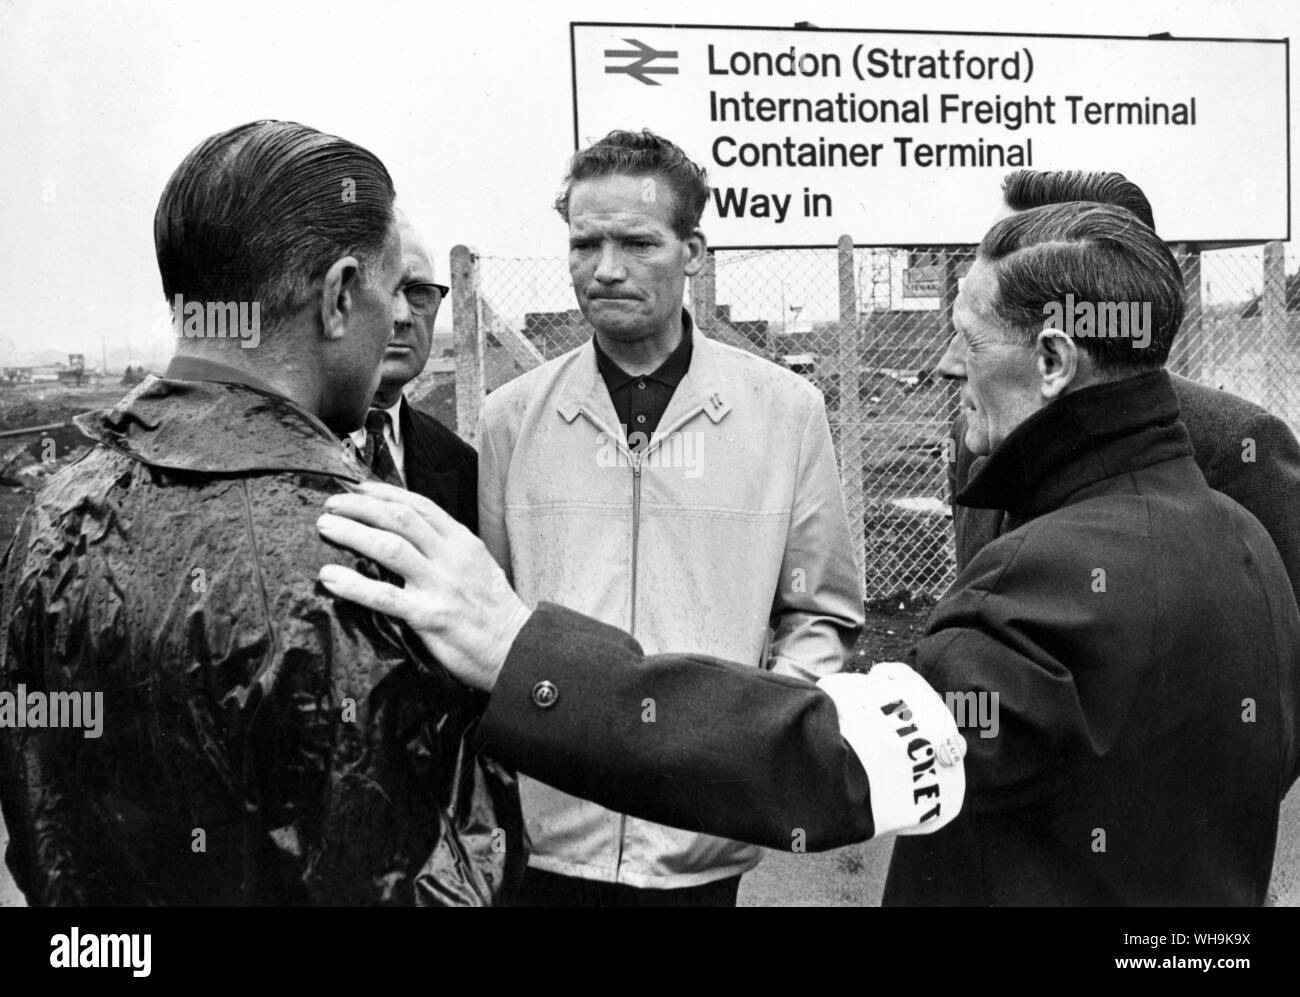 England: 23rd June 1967: The Stratford Railway Freight Dispute. Mr Ted Bowers (wearing light jockey) the spokesman of the Railway Freightman on strike at the London (Stratford) International freight container terminal. Stock Photo